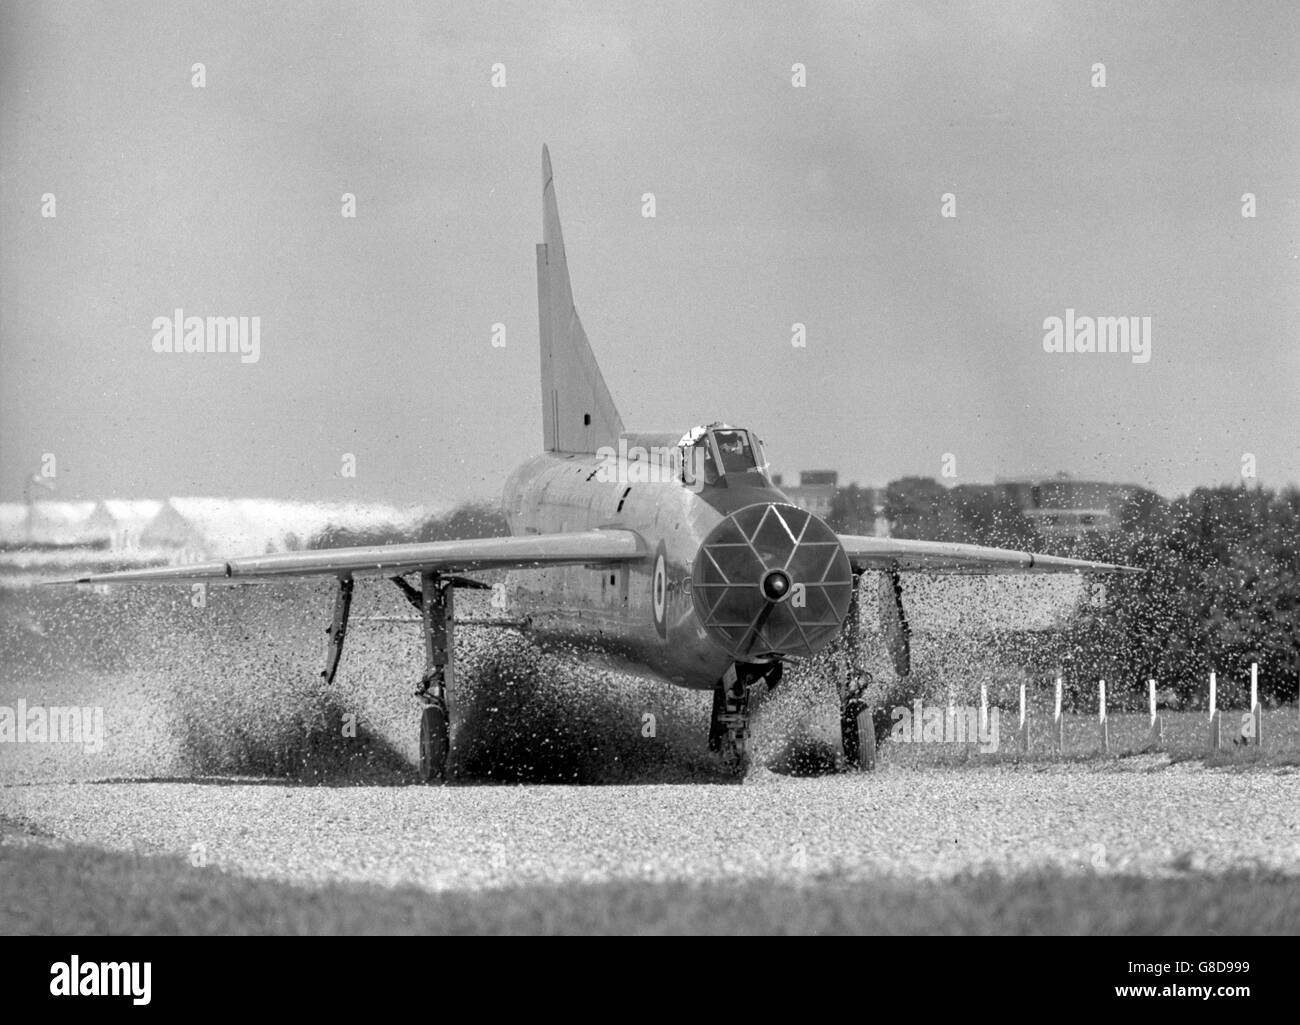 Shingle scatters as a Lightning (the first British plane to fly at Mach 2 in November 1958) plunges into the loose material to land during arrester trials at Farnborough, Hampshire. The trials were a continuation of experiments to find a material that will safely decelerate a civil aircraft should it make a bad landing and overshoot the runway. Stock Photo